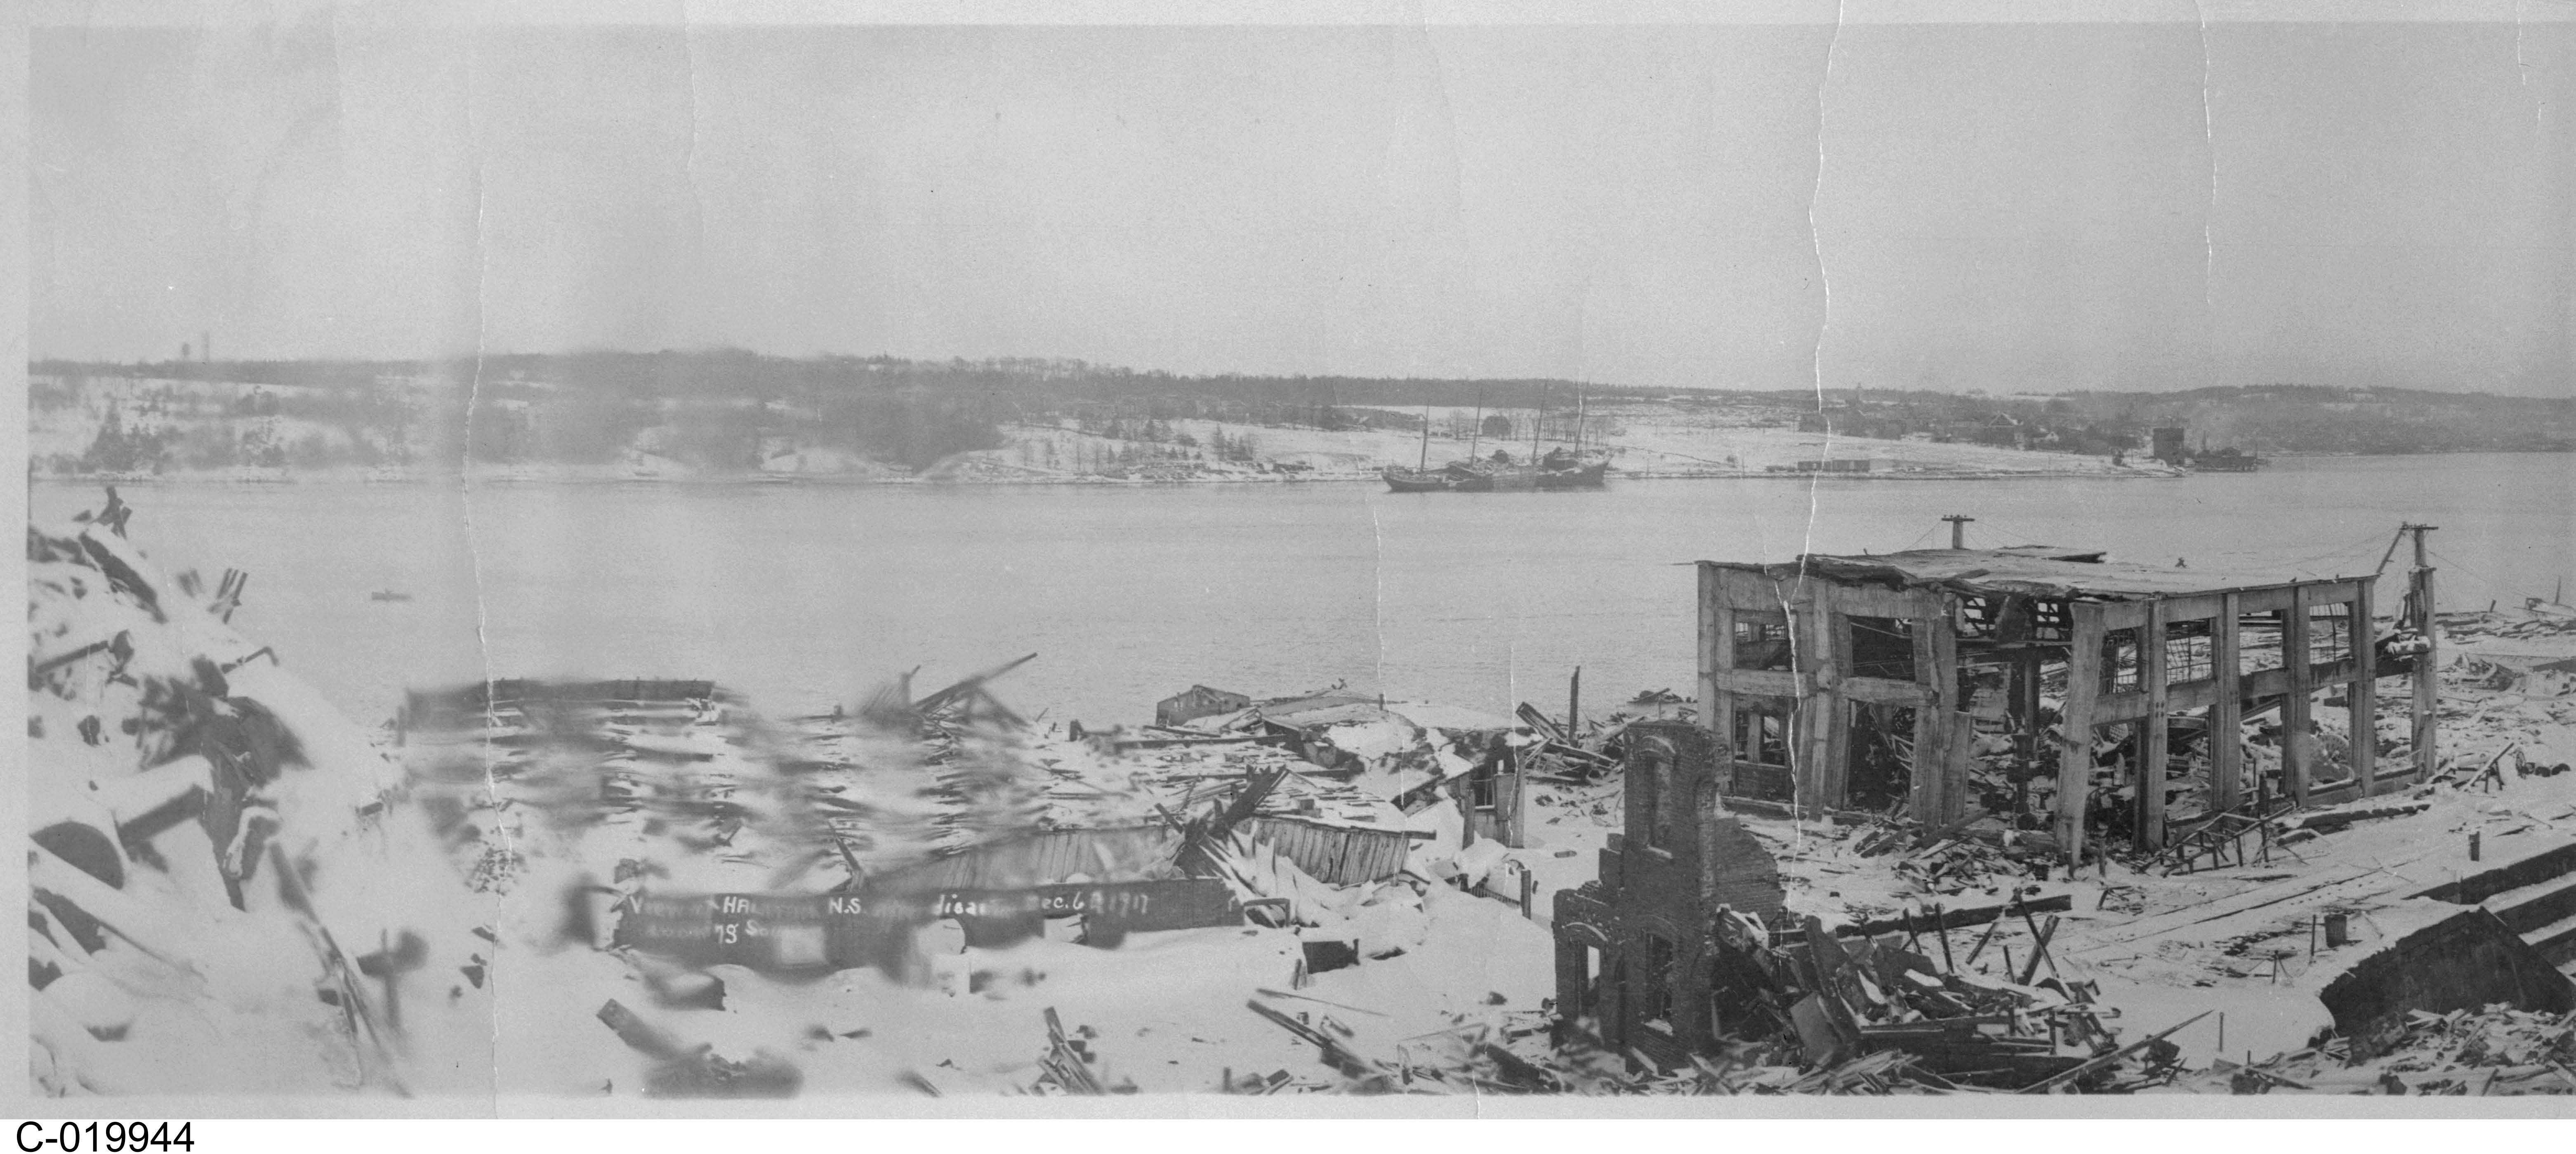 Black and white photograph. A variety of buildings are shown in ruins. Factories are in operation in the distance. A body of water is visible on the left side of the photo.